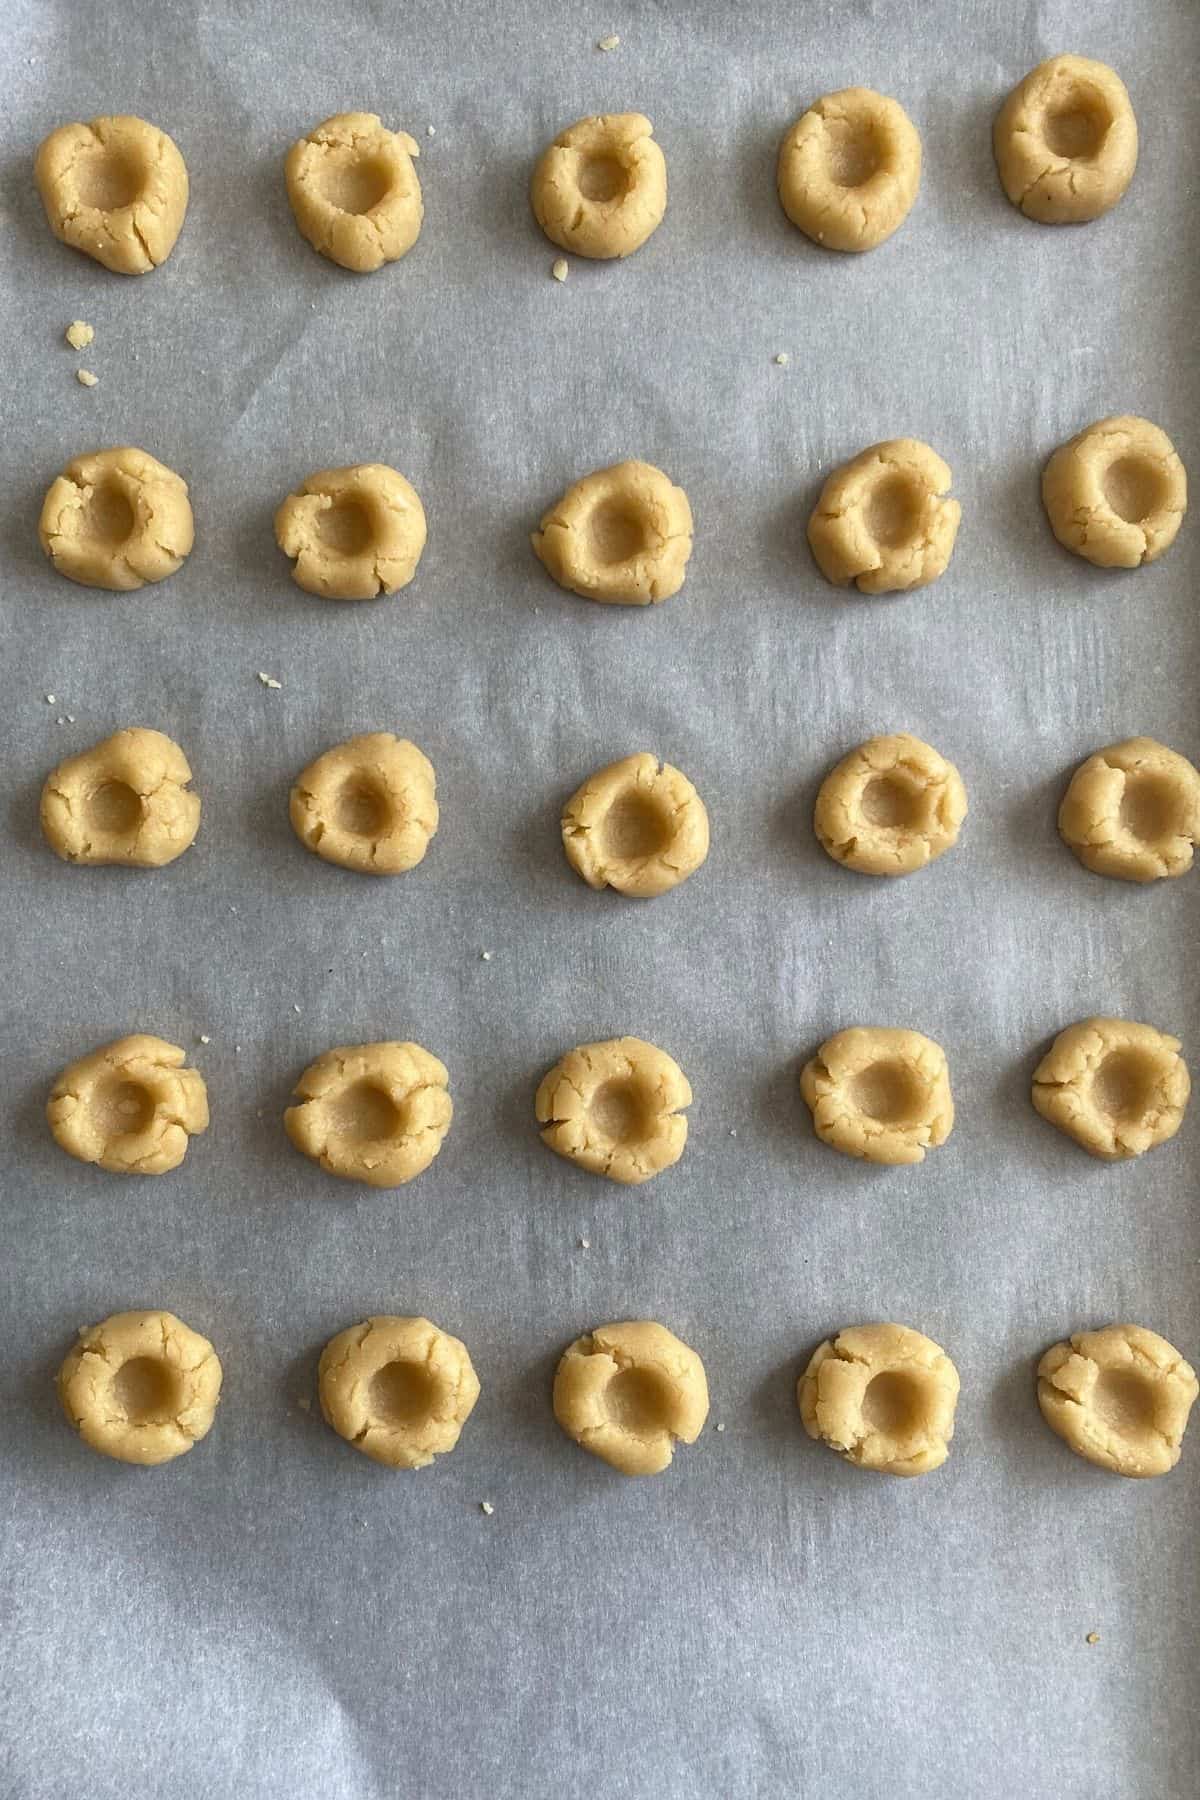 An overhead view of thumbprinted cookie dough before jam is placed